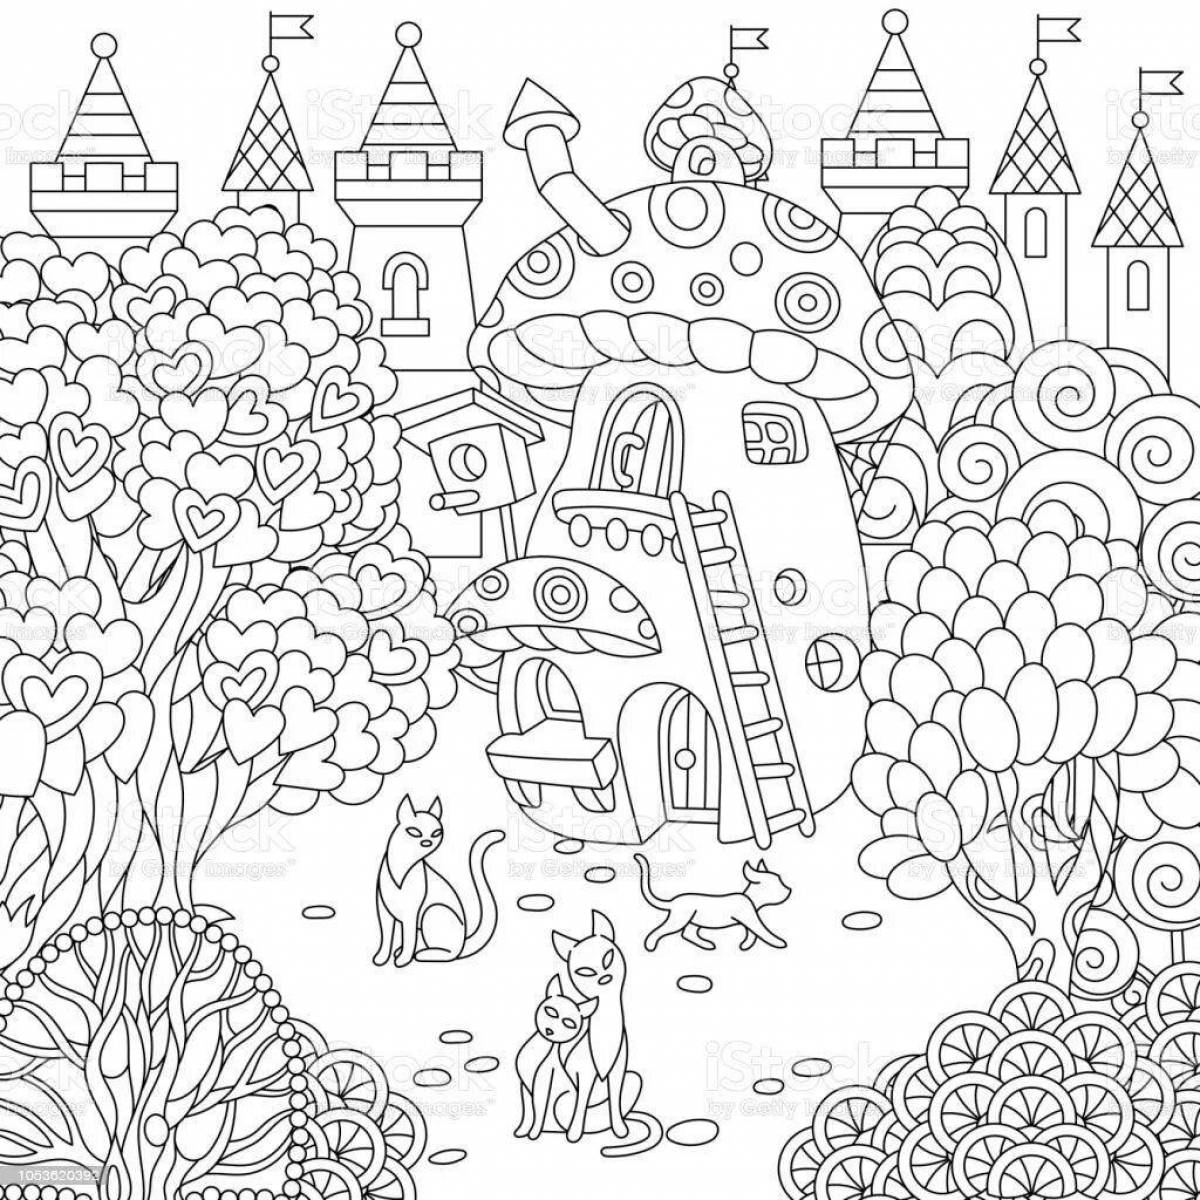 Grand city coloring book for kids